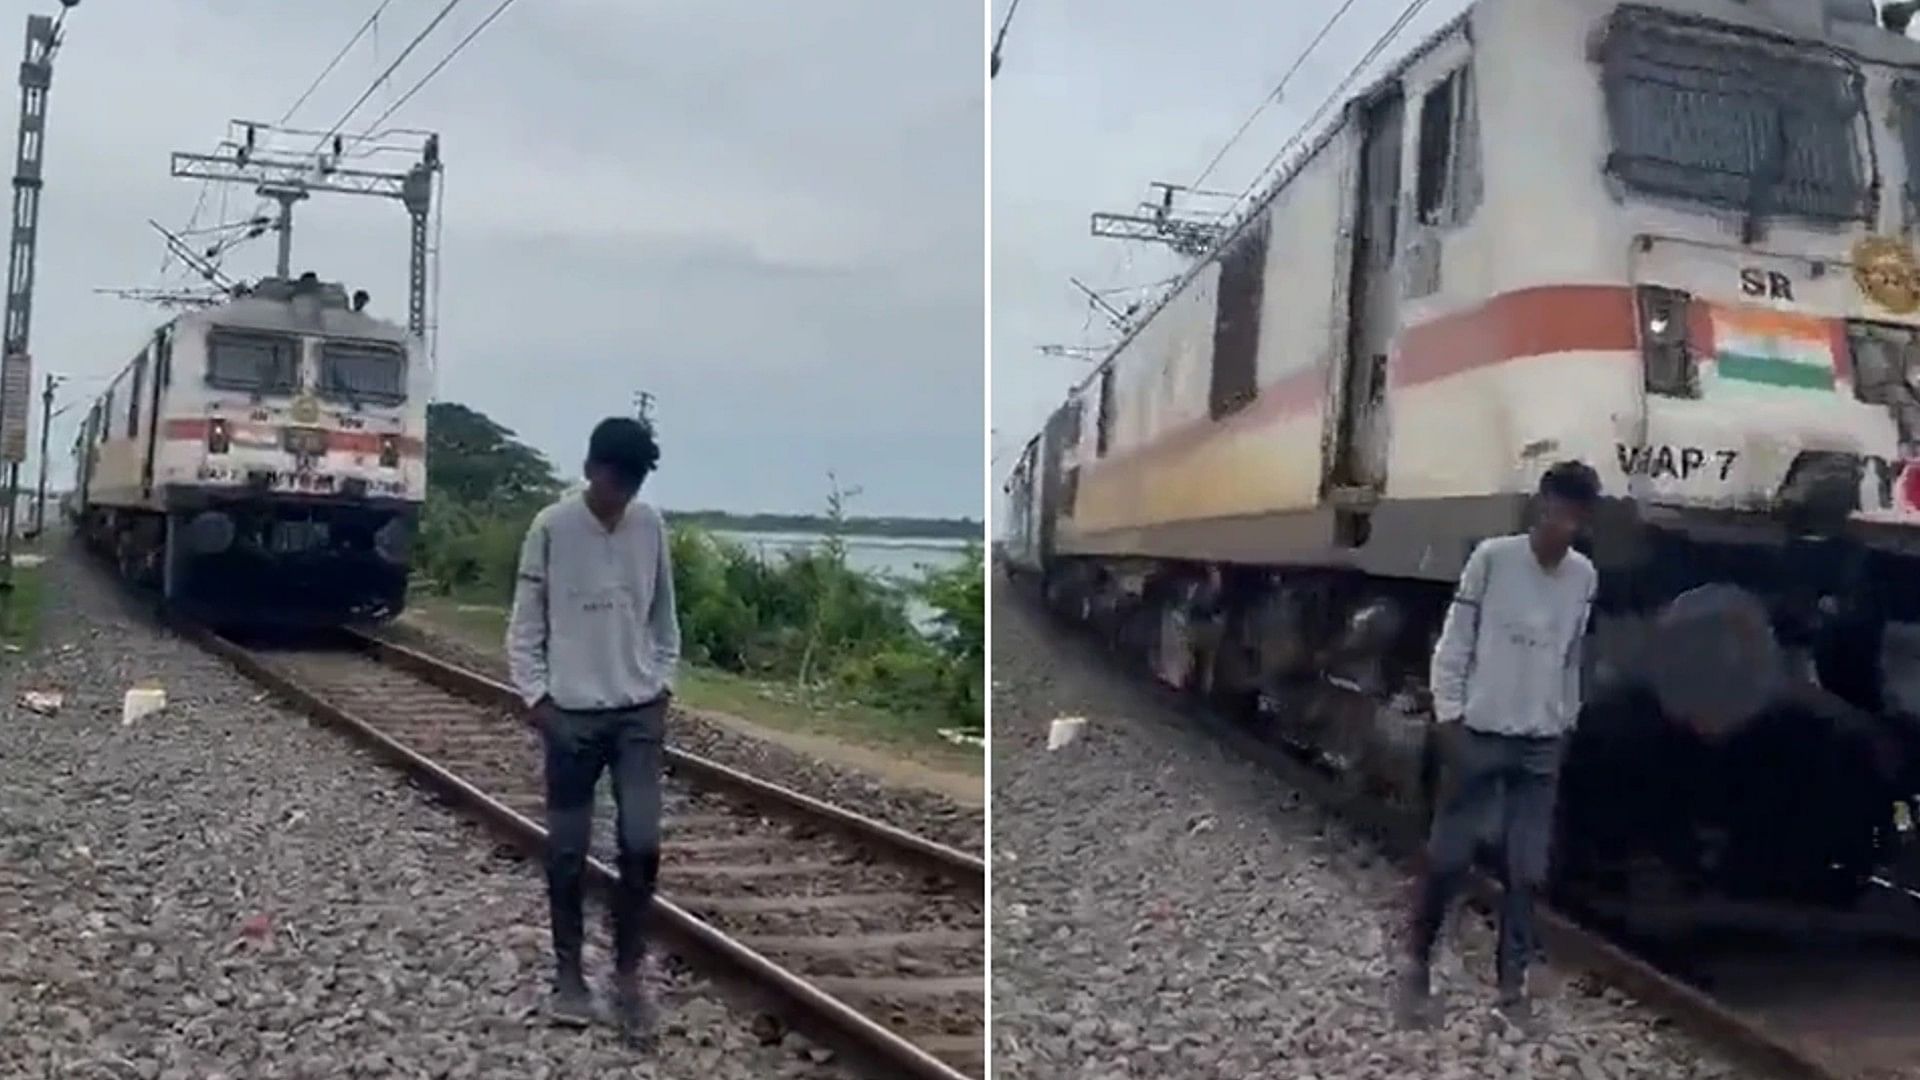 Train accident happened while making reel, boy was walking on railway track